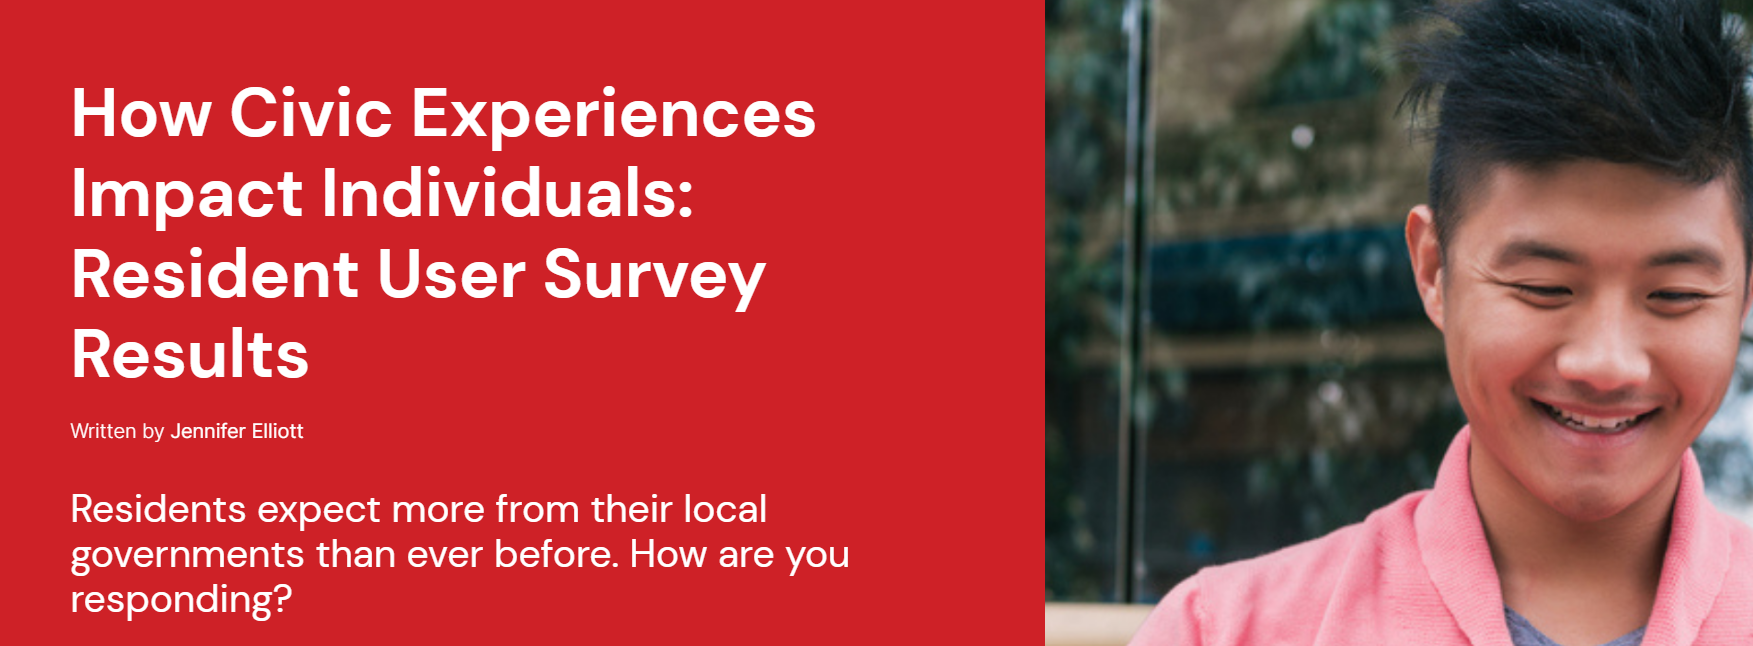 How Civic Experiences Impact Individuals: Resident User Survey Results